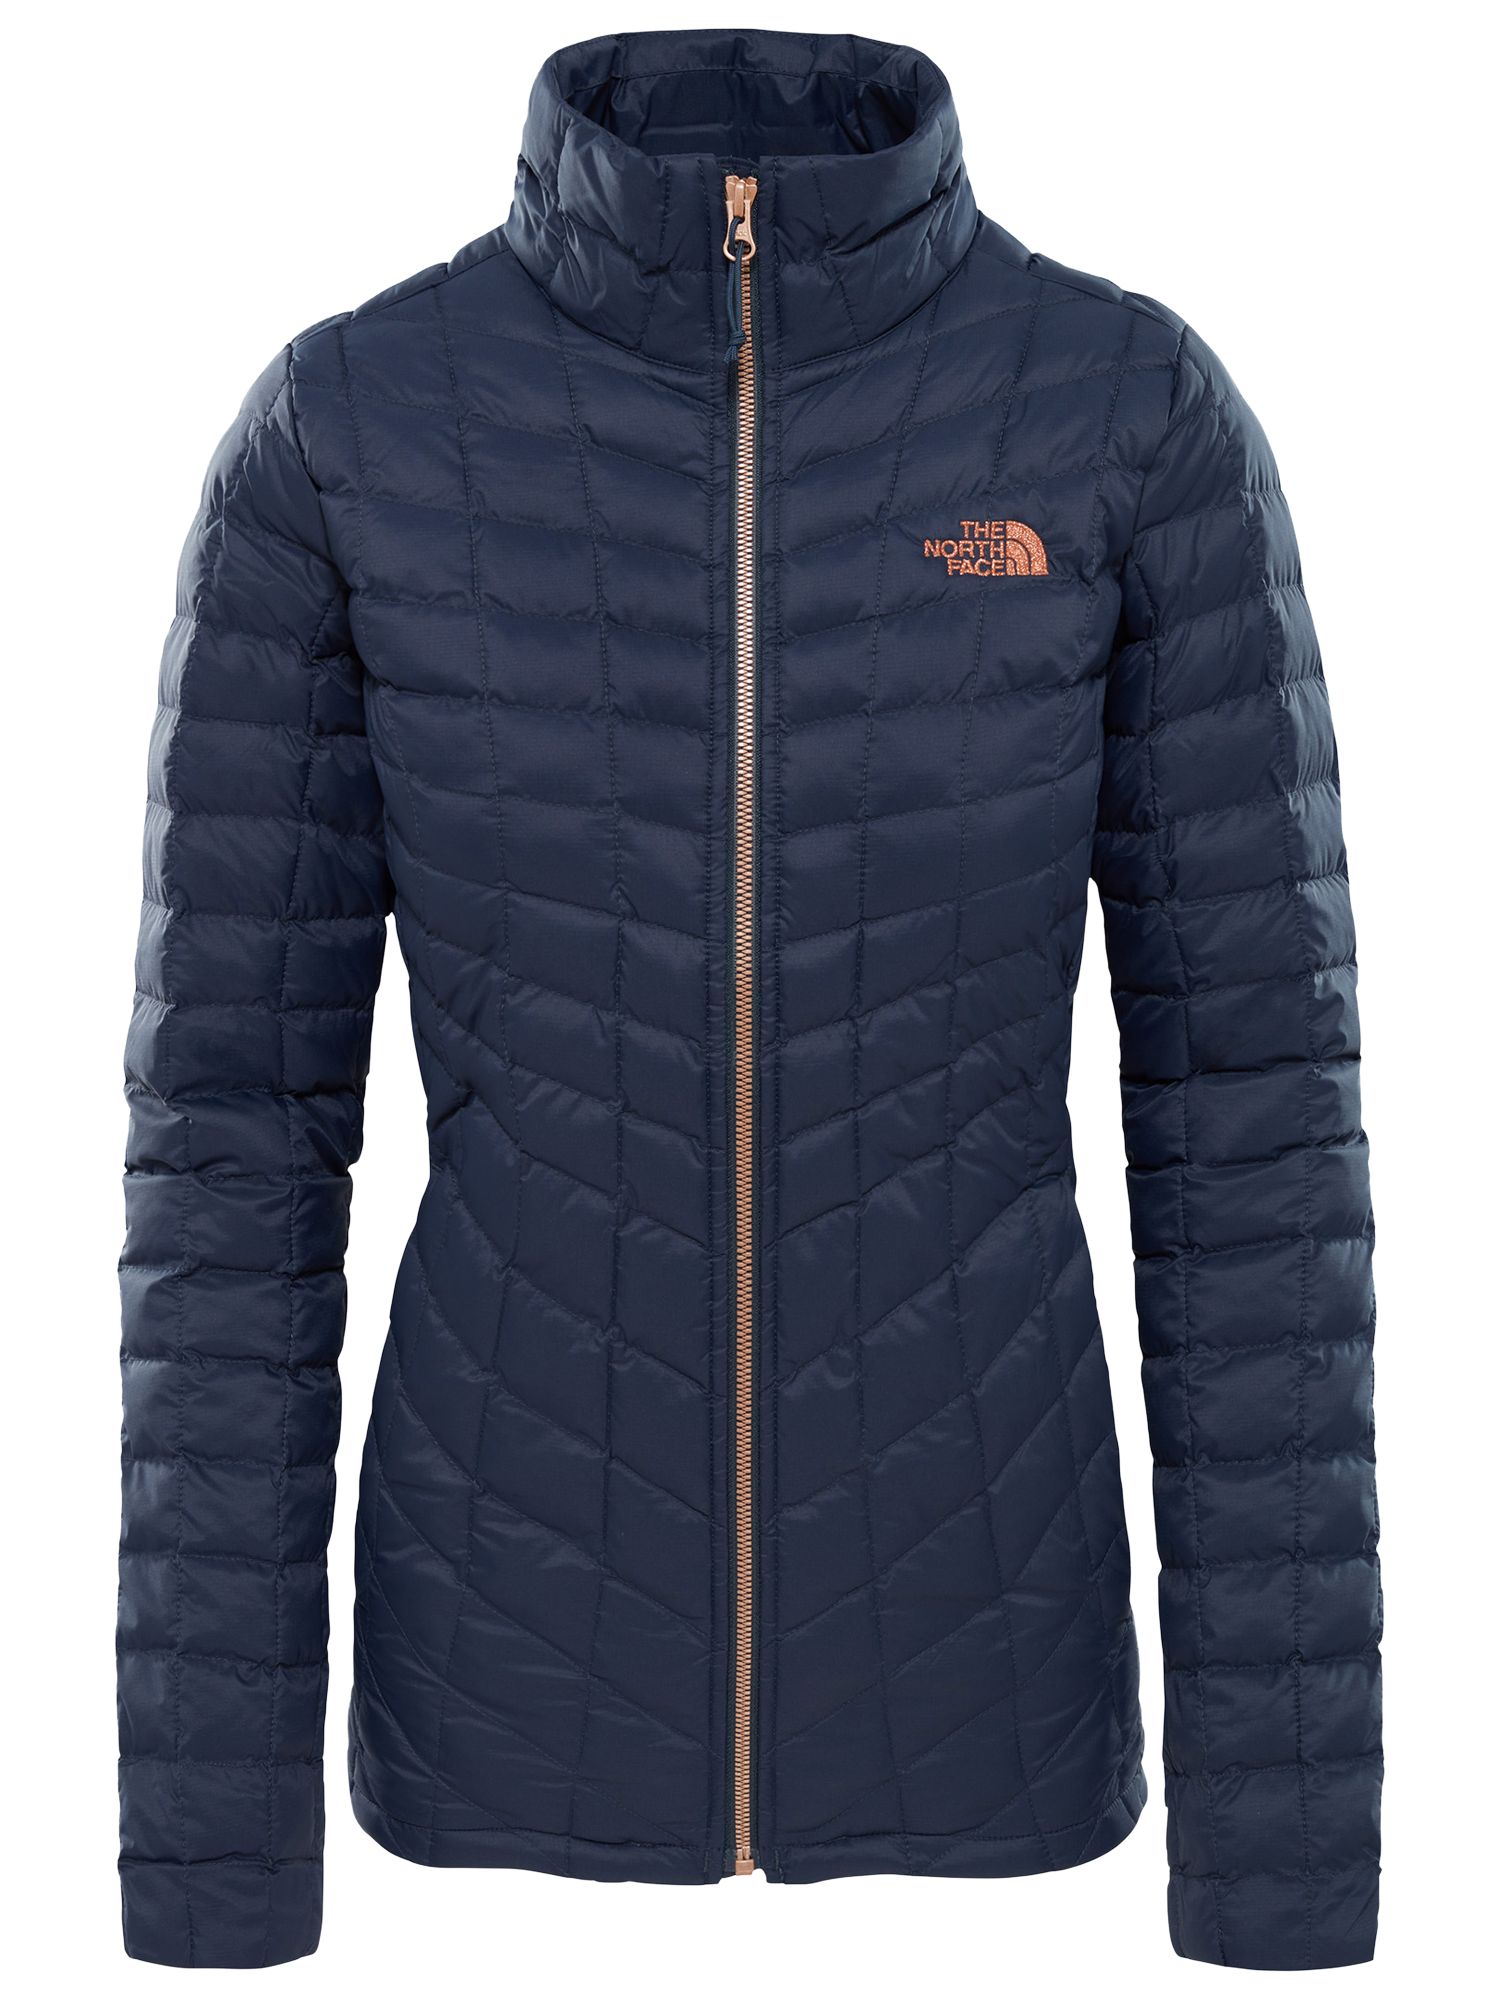 The North Face Thermoball Full Zip Women's Jacket, Navy/Metallic Copper